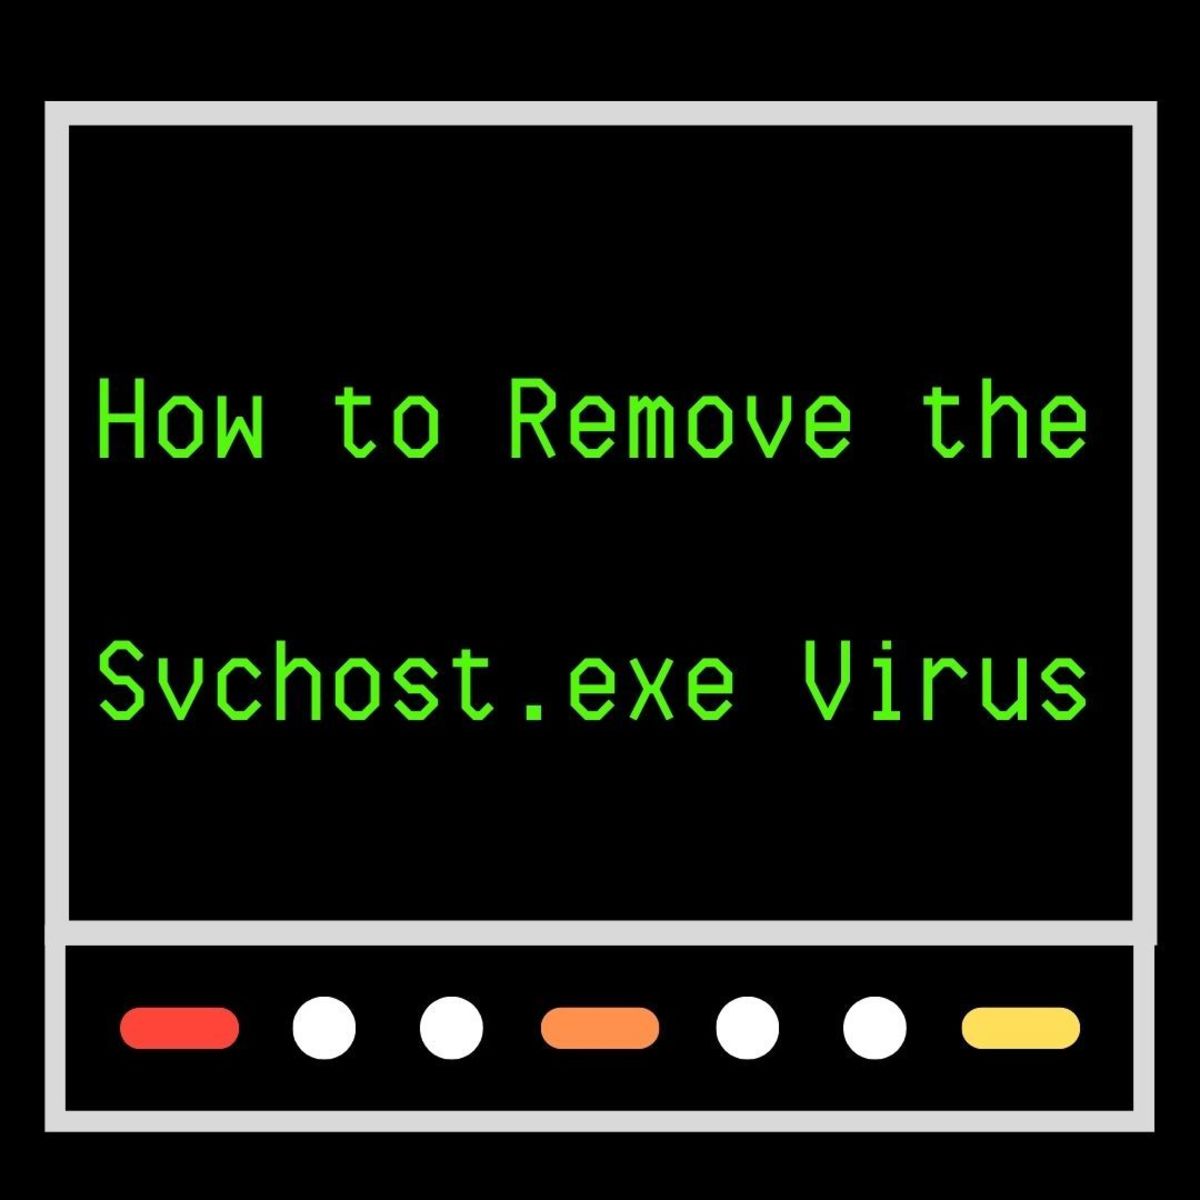 How to Easily Remove the Svchost.exe Virus